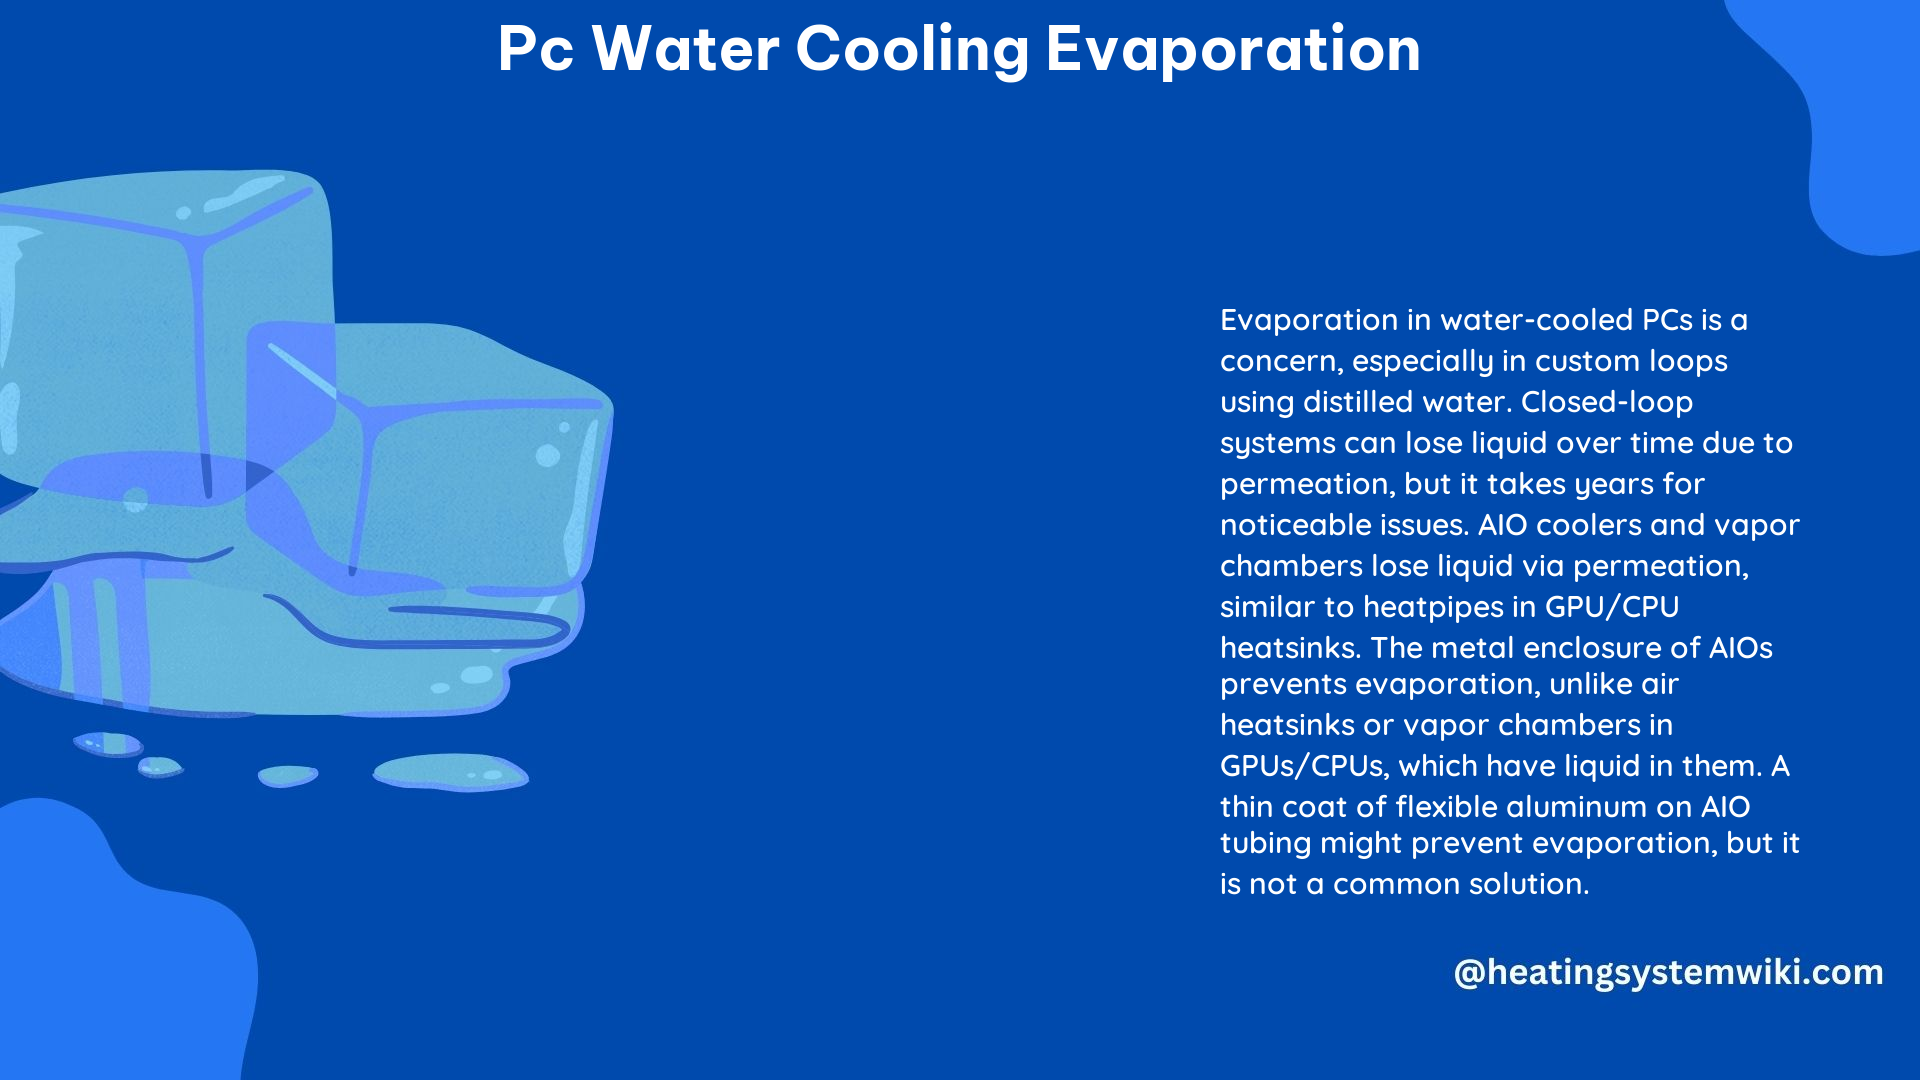 PC Water Cooling Evaporation